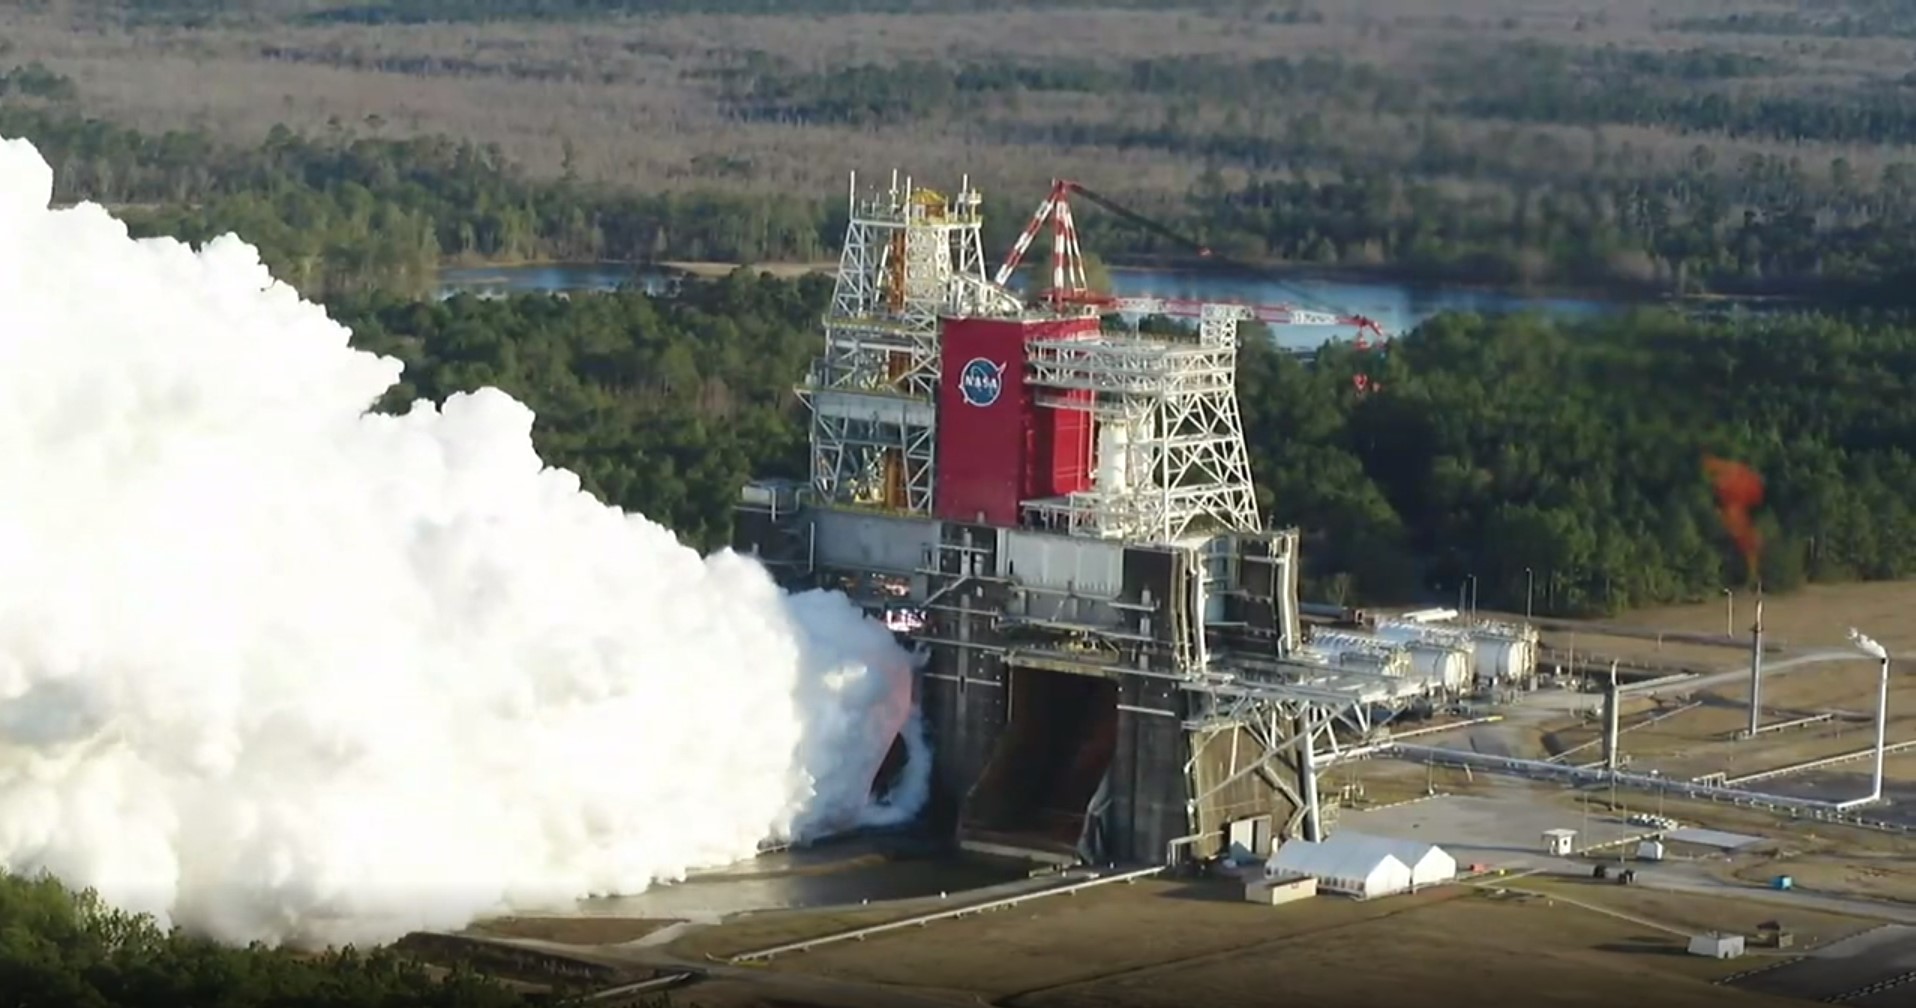 NASA Targets 2nd SLS Green Run Hot Fire Test on March 18 for Artemis Moon Missions